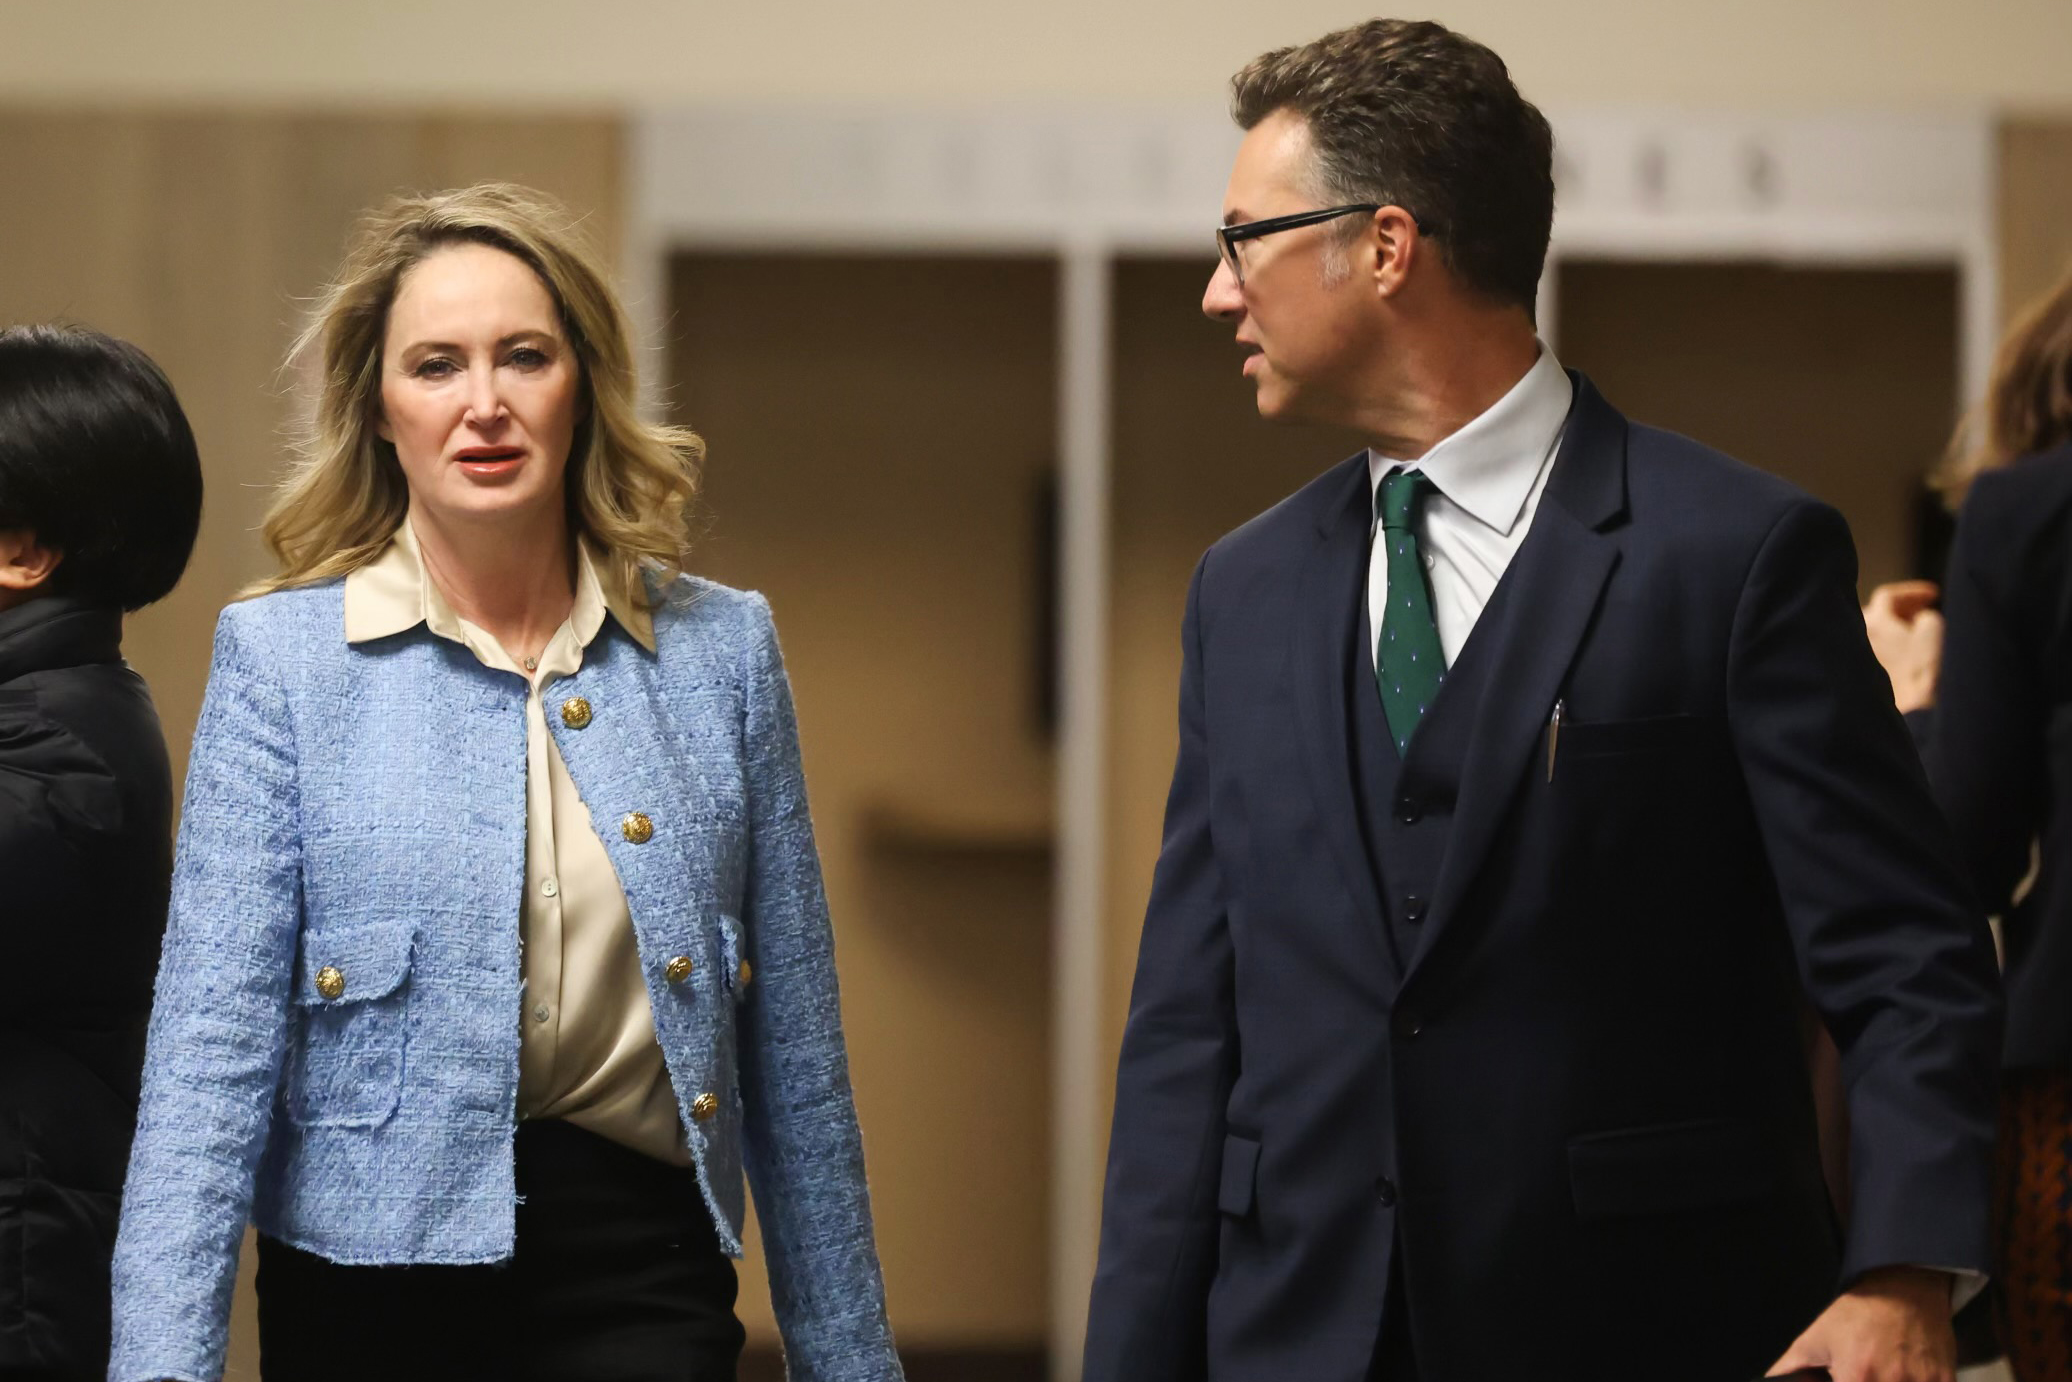 A woman, Yvette Corkrean, left, and a man, her attorney walk through the hallways of the Hall of Justice at Superior Court with people in the the background.